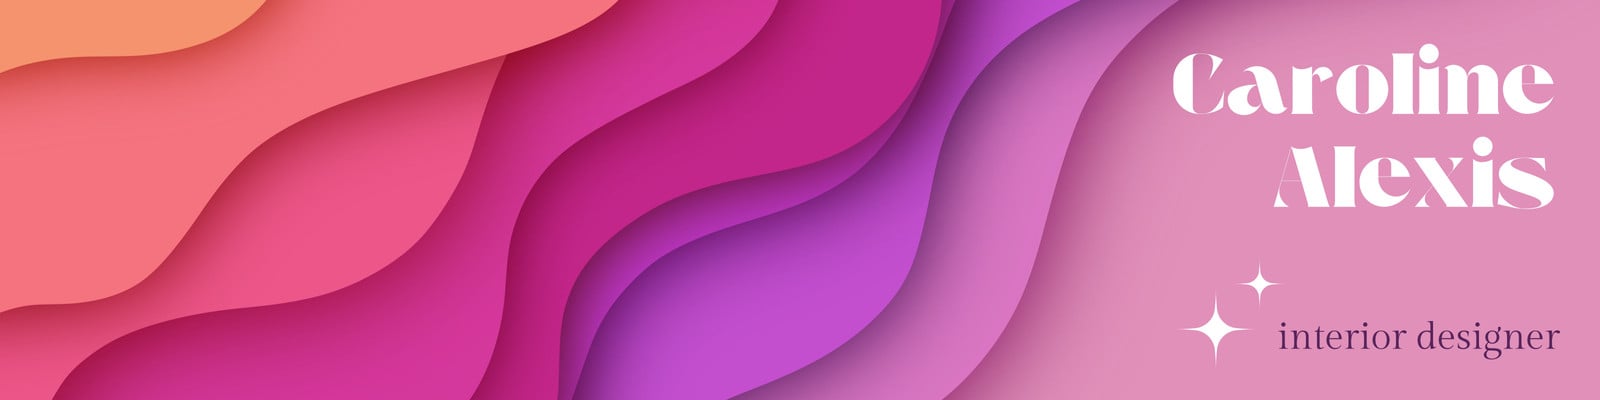 Multicolored Colorful Abstract Layered LinkedIn Profile Background